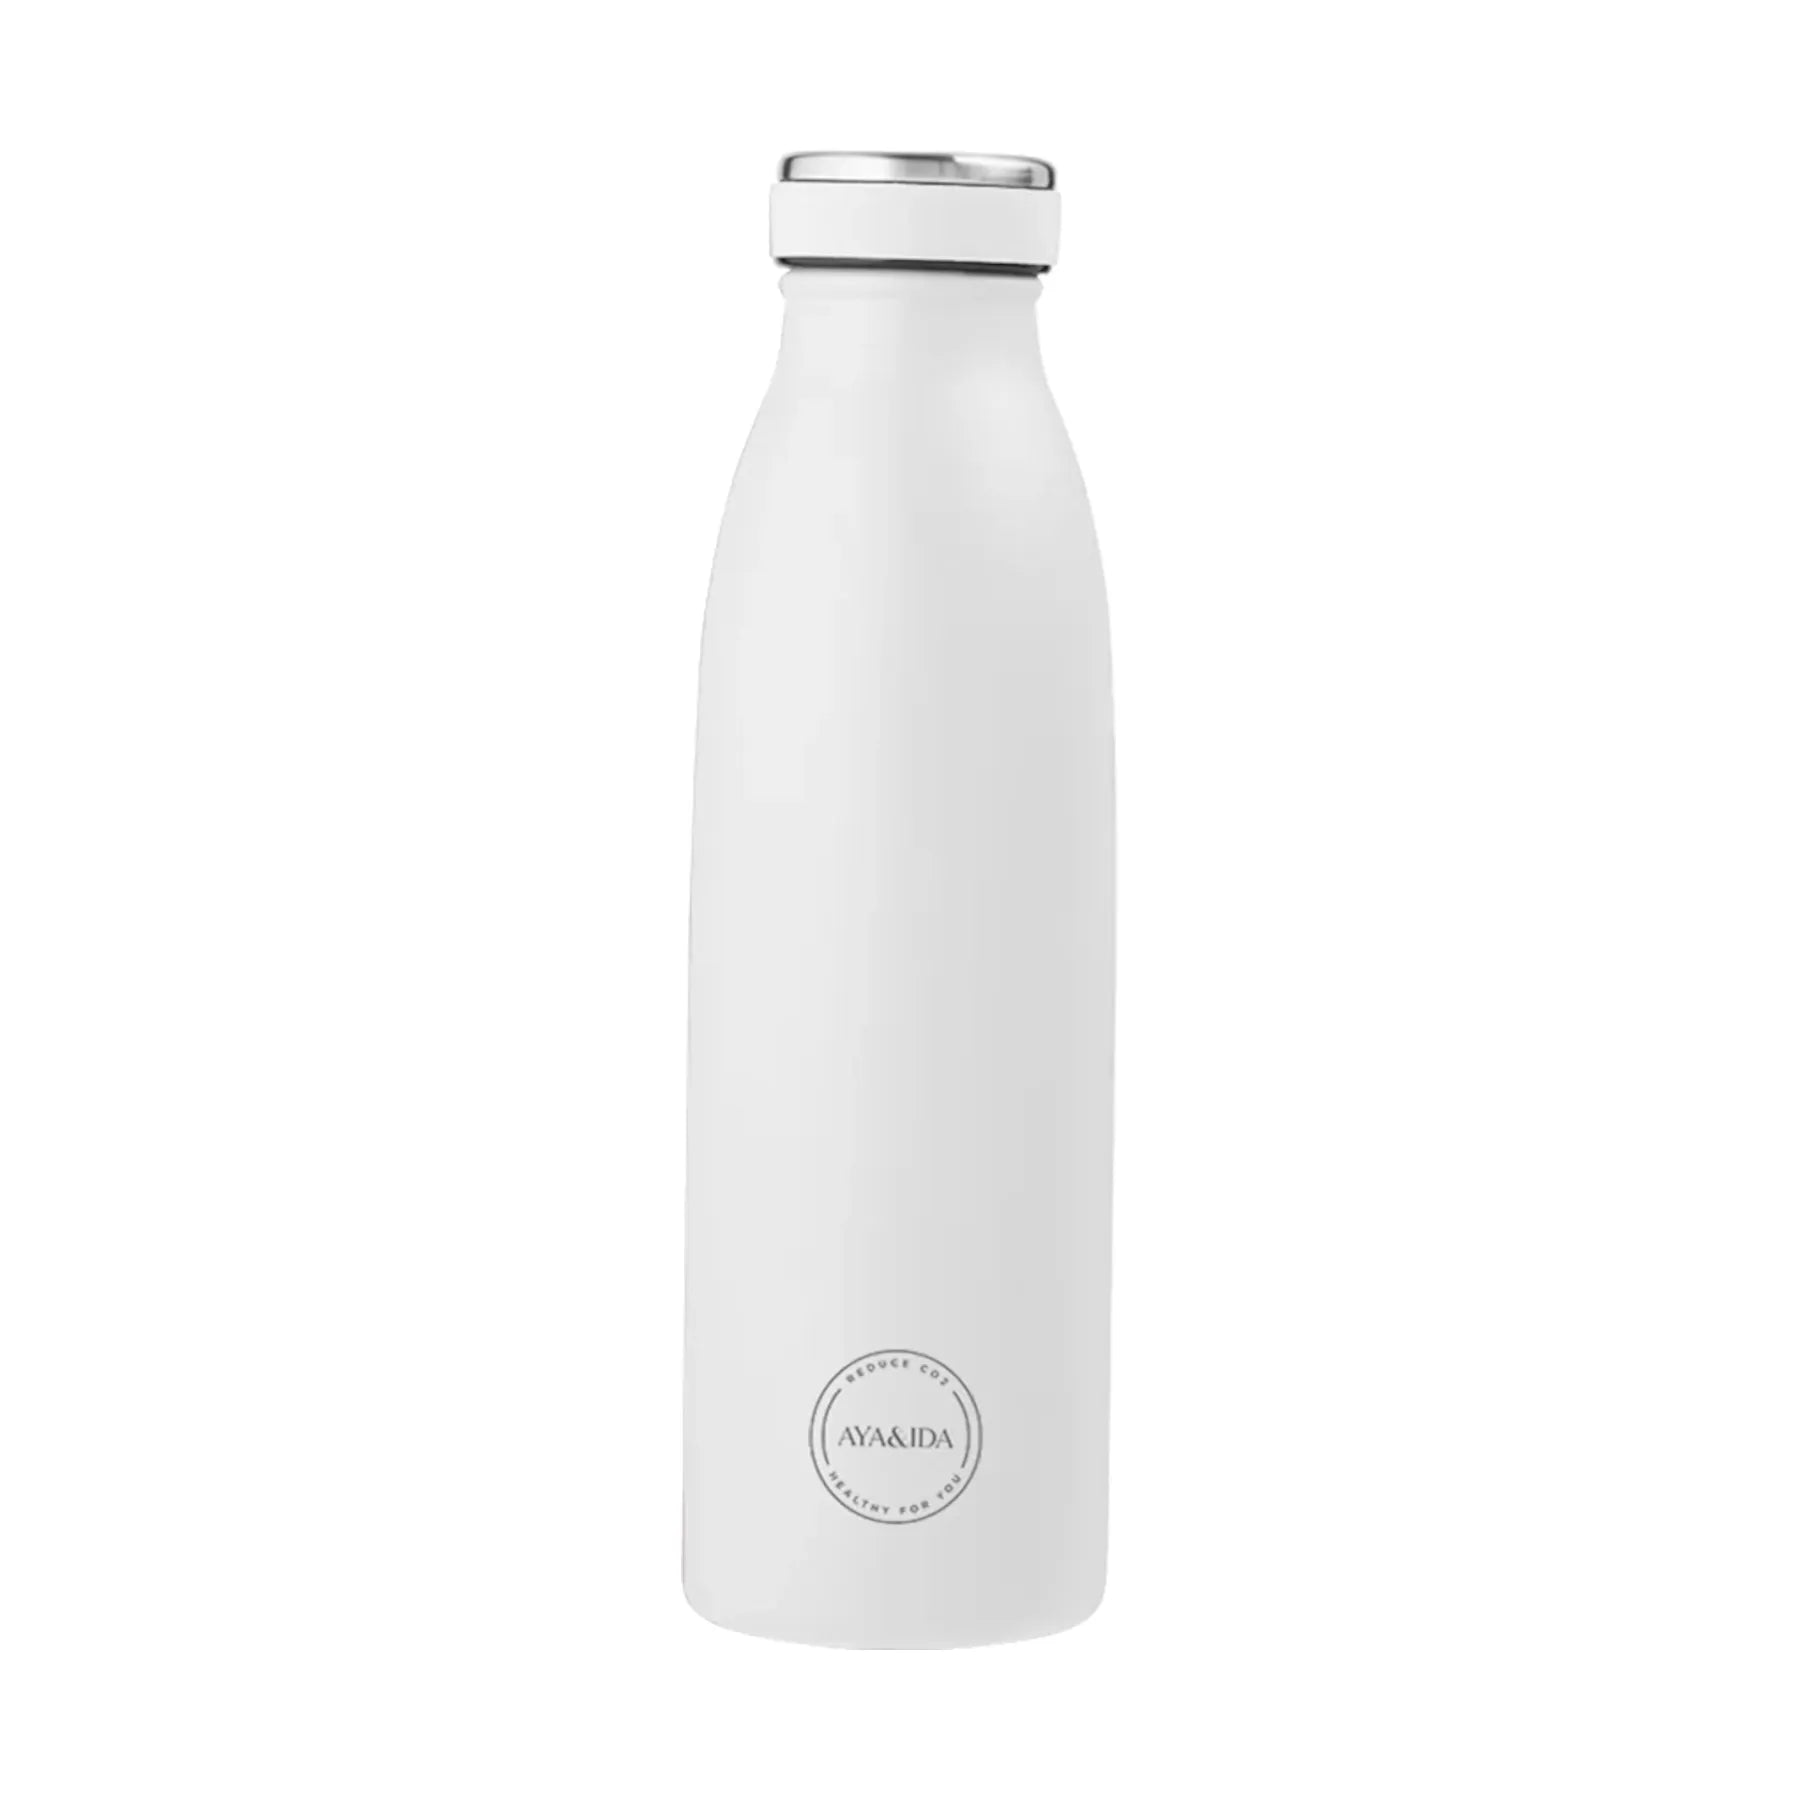 Aya&Ida 500ml Reusable bottle for Hot or Cold drinks | Winter White at Lifestory